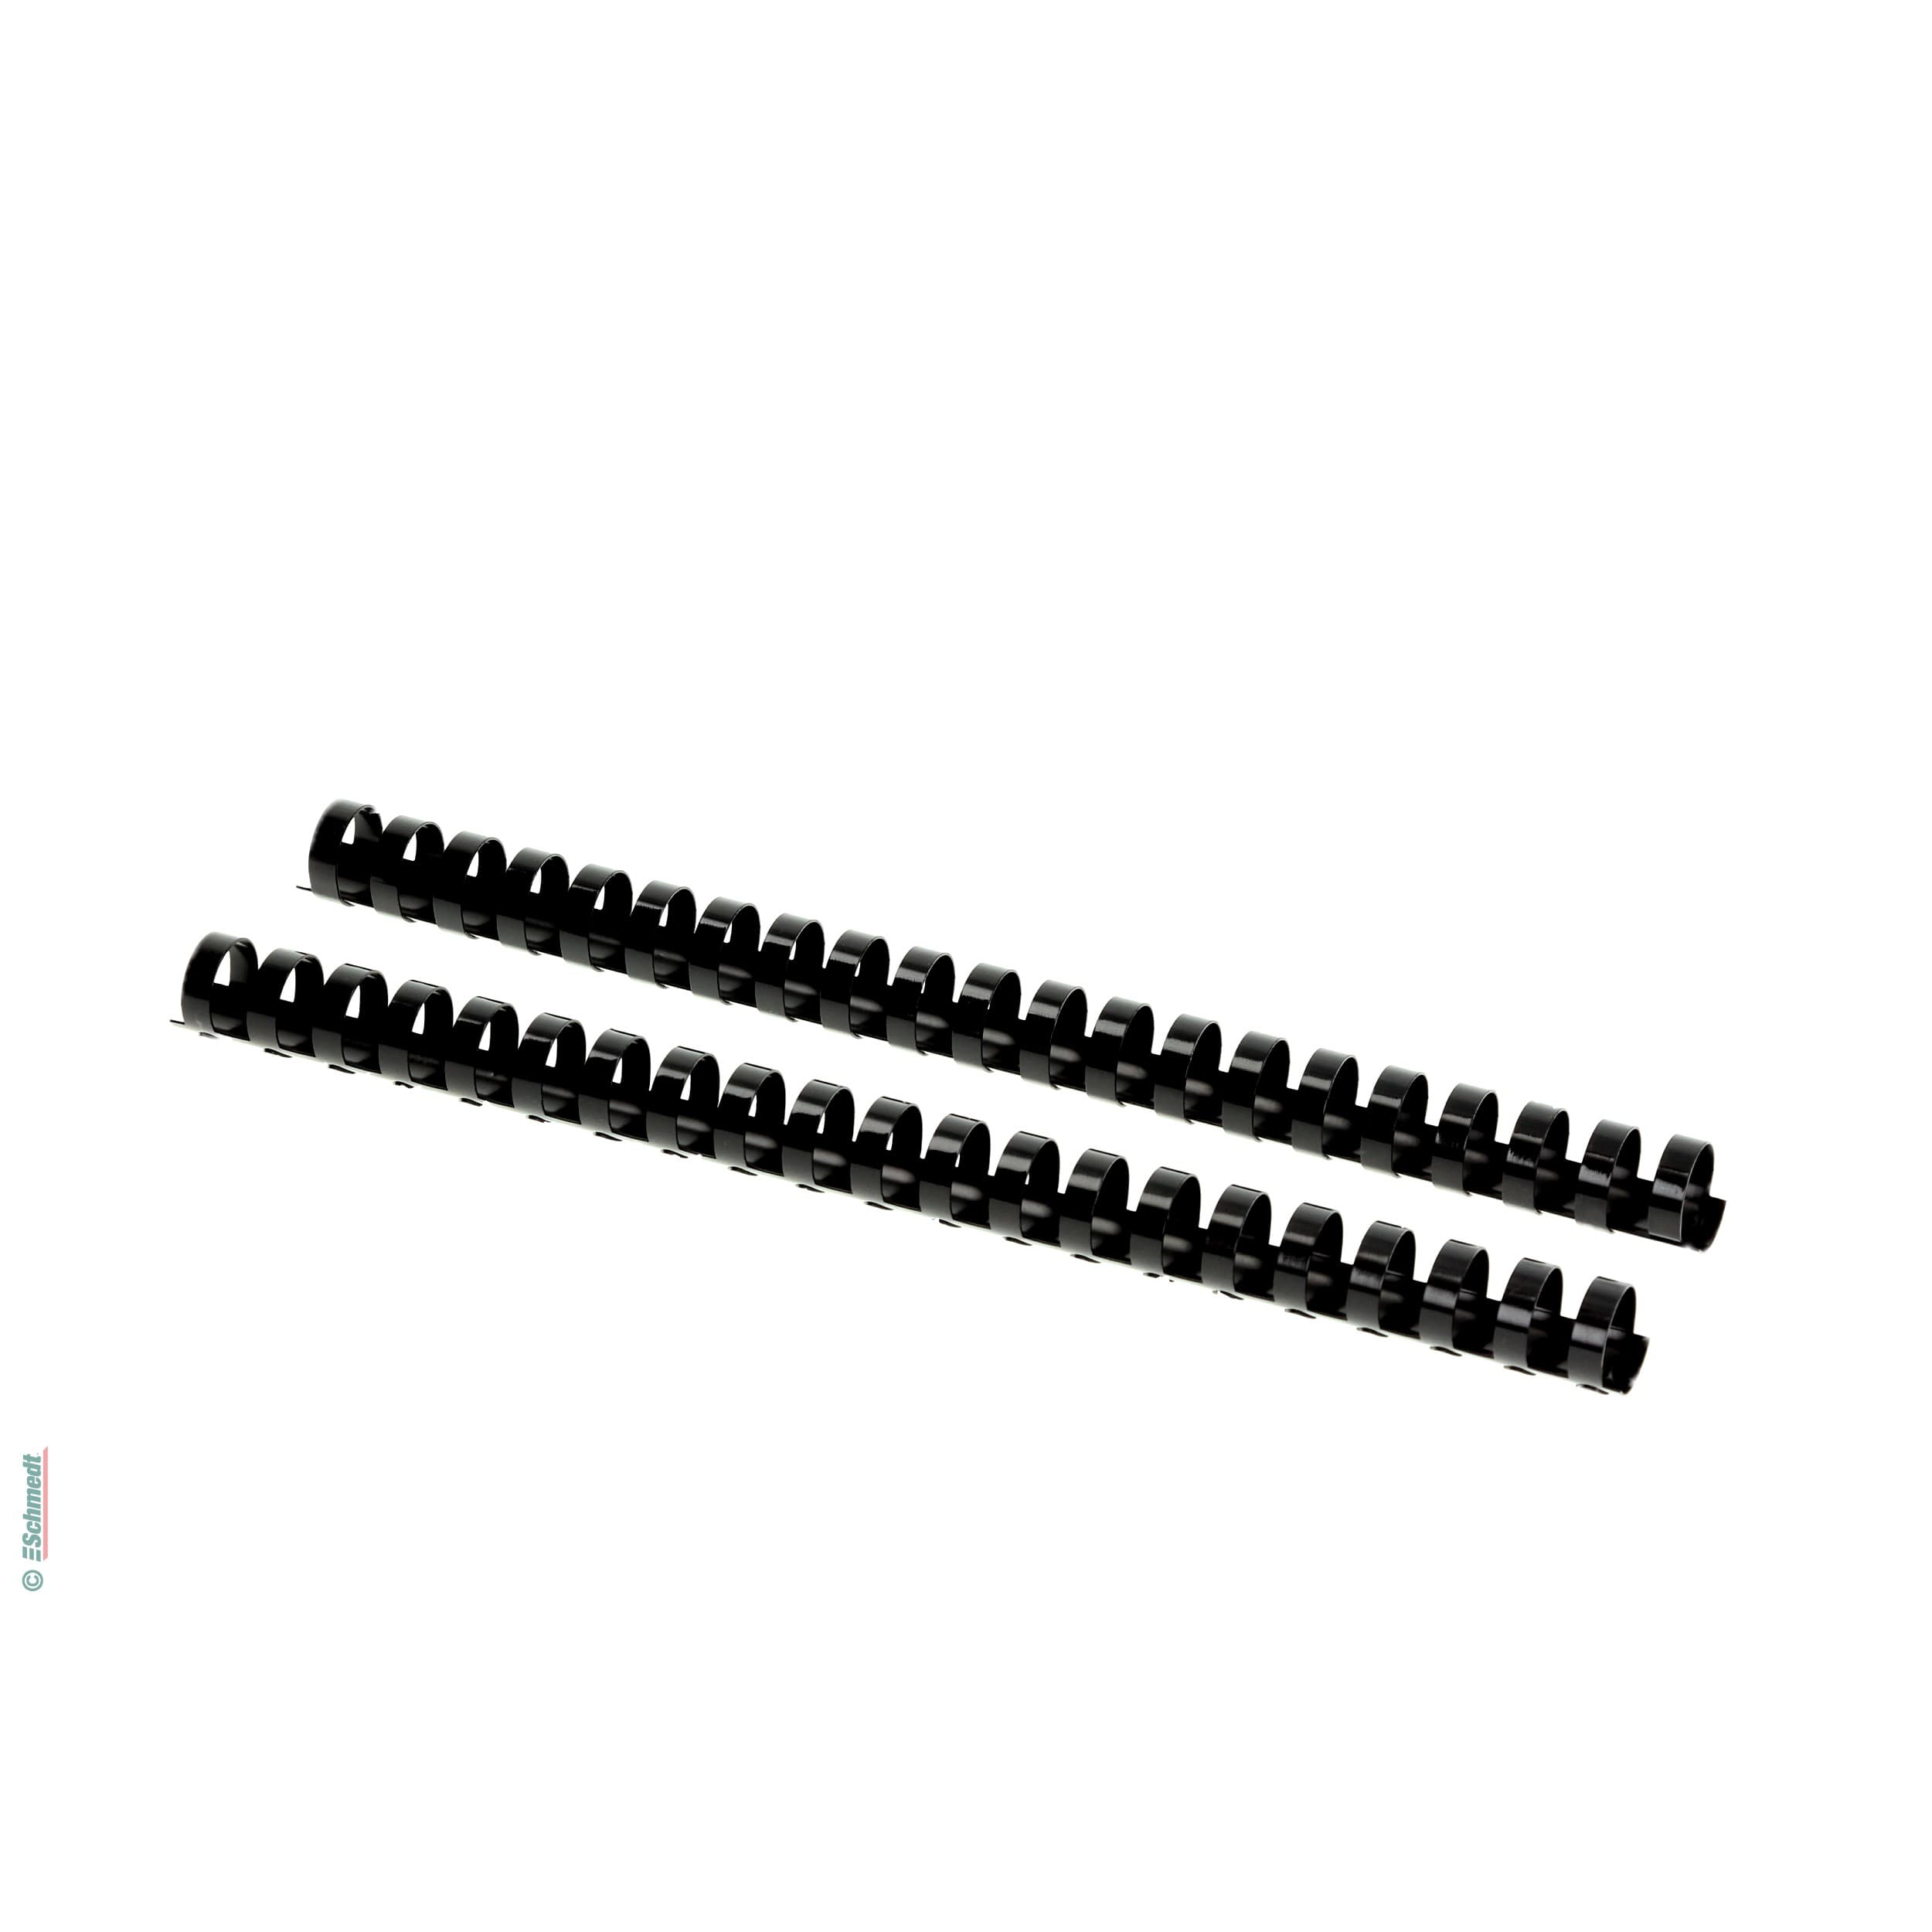 Plastic binding combs - round - Diameter (in mm) 28 - Colour black - to be processed in plastic-comb binding machines... - image-2